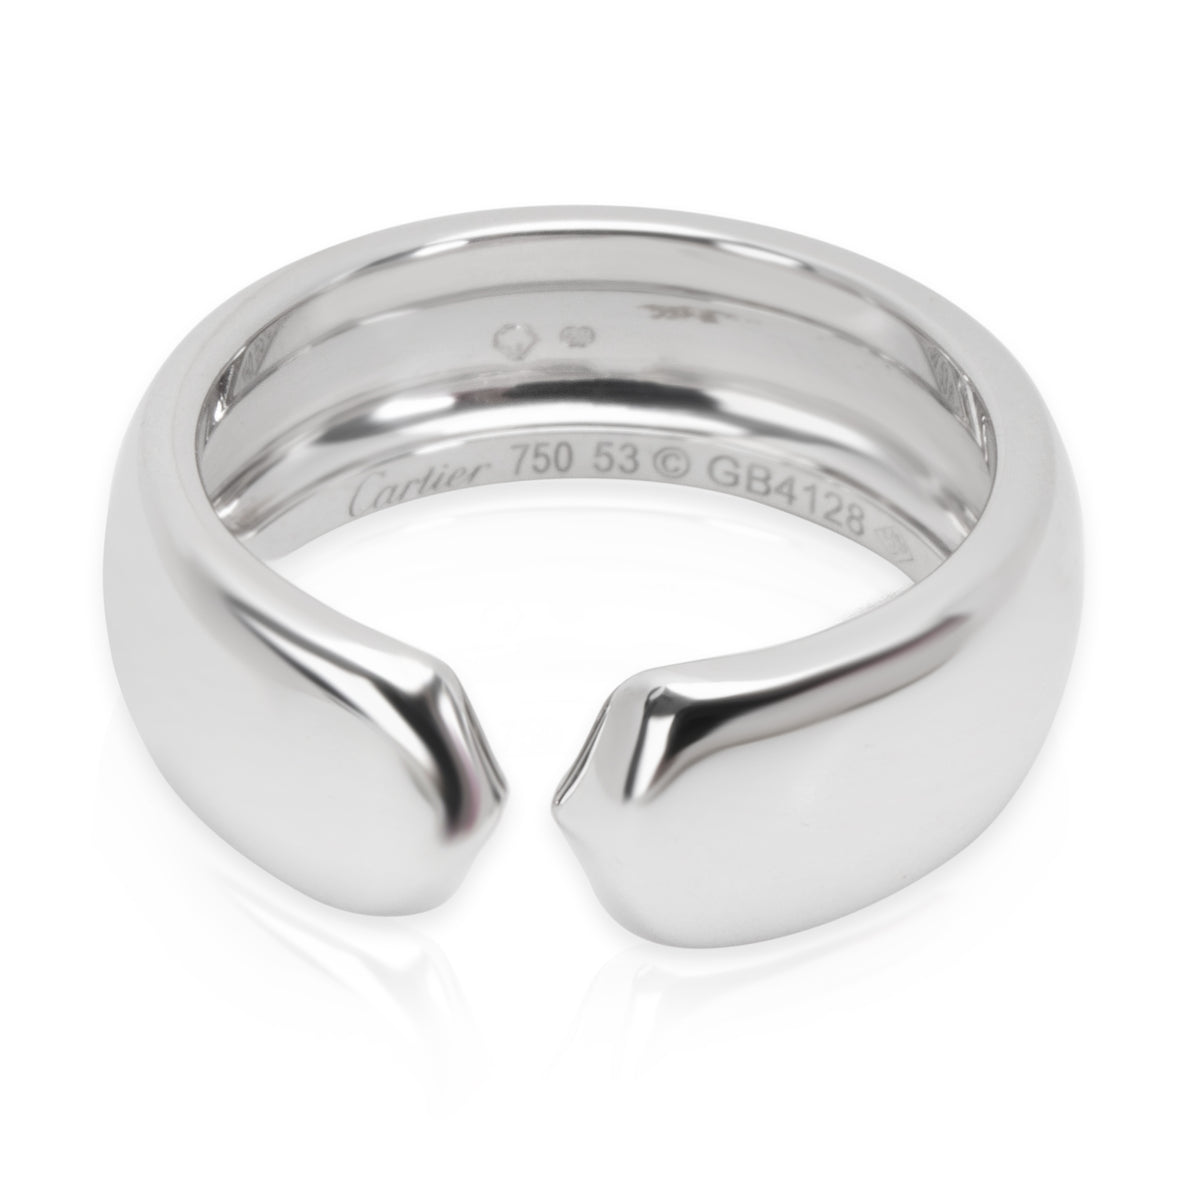 Cartier C Profile Ring in 18K White Gold